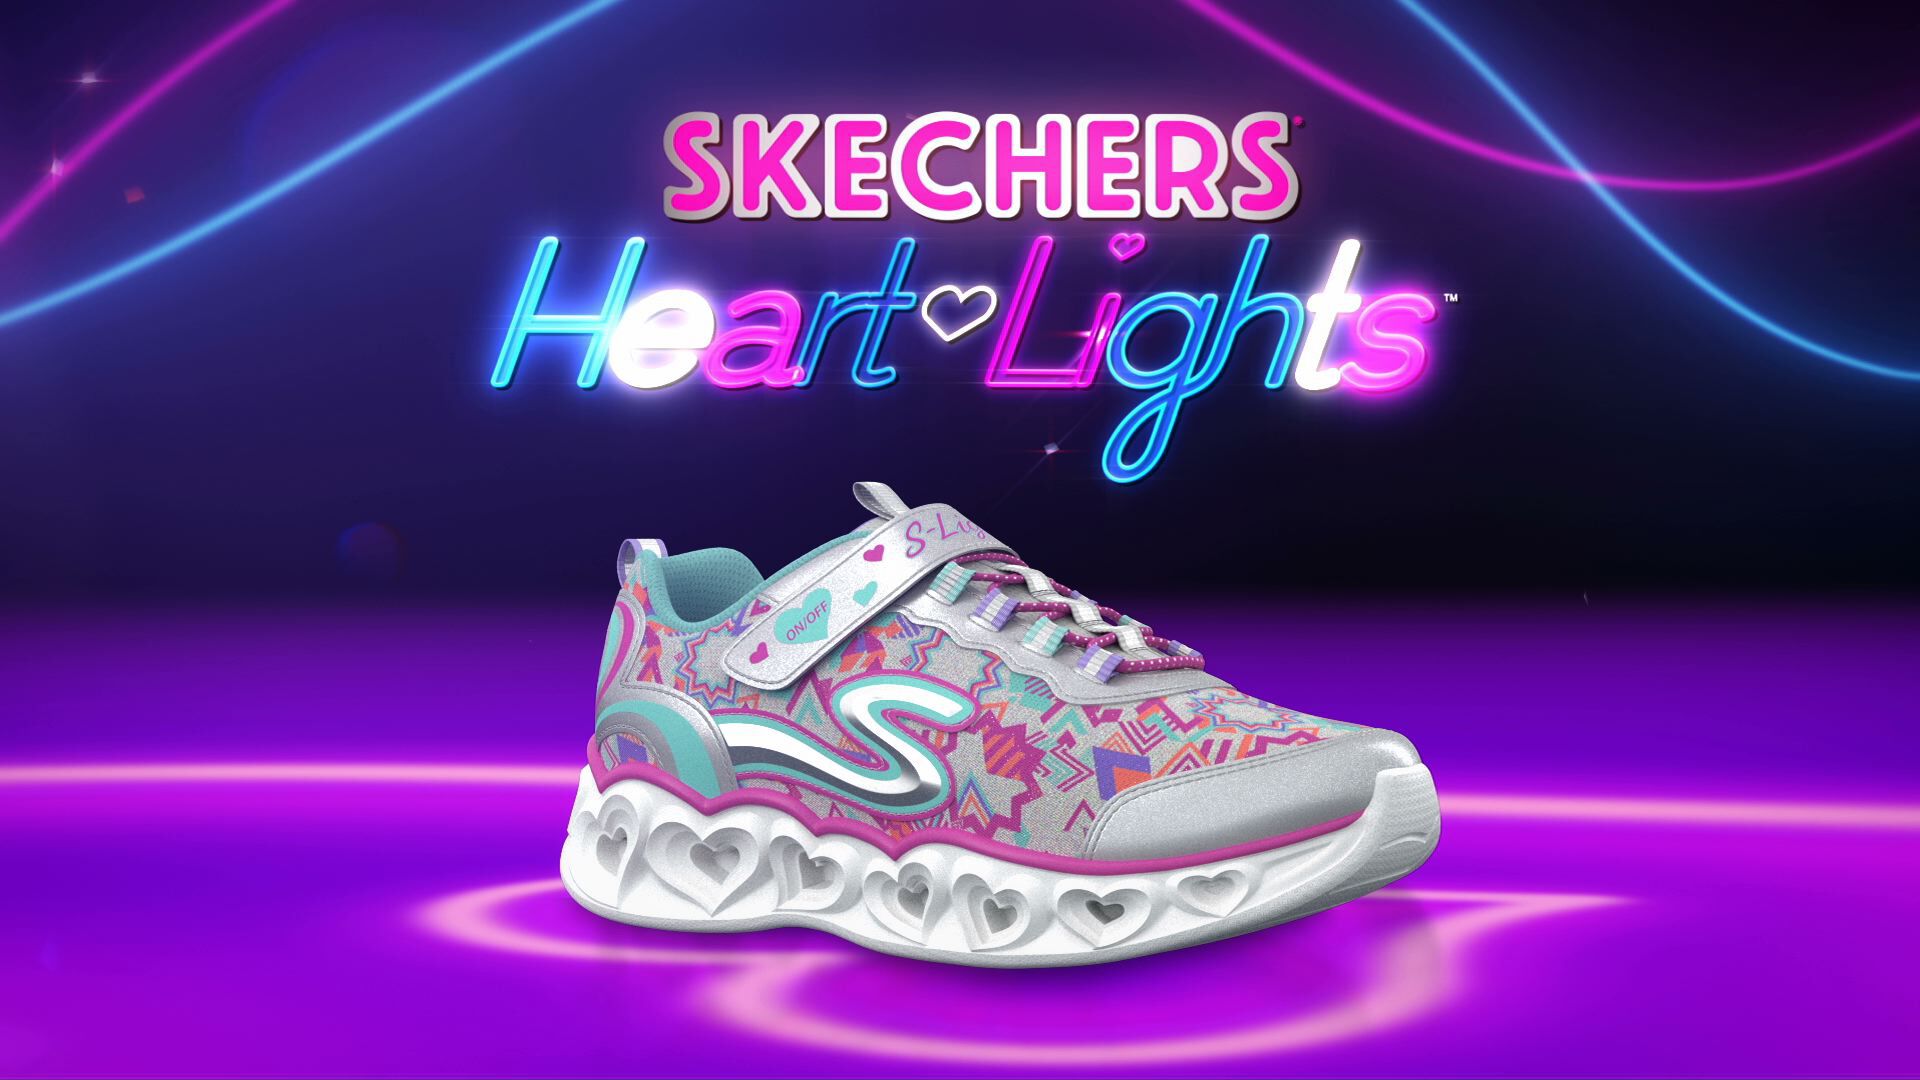 skechers shoes outlet store